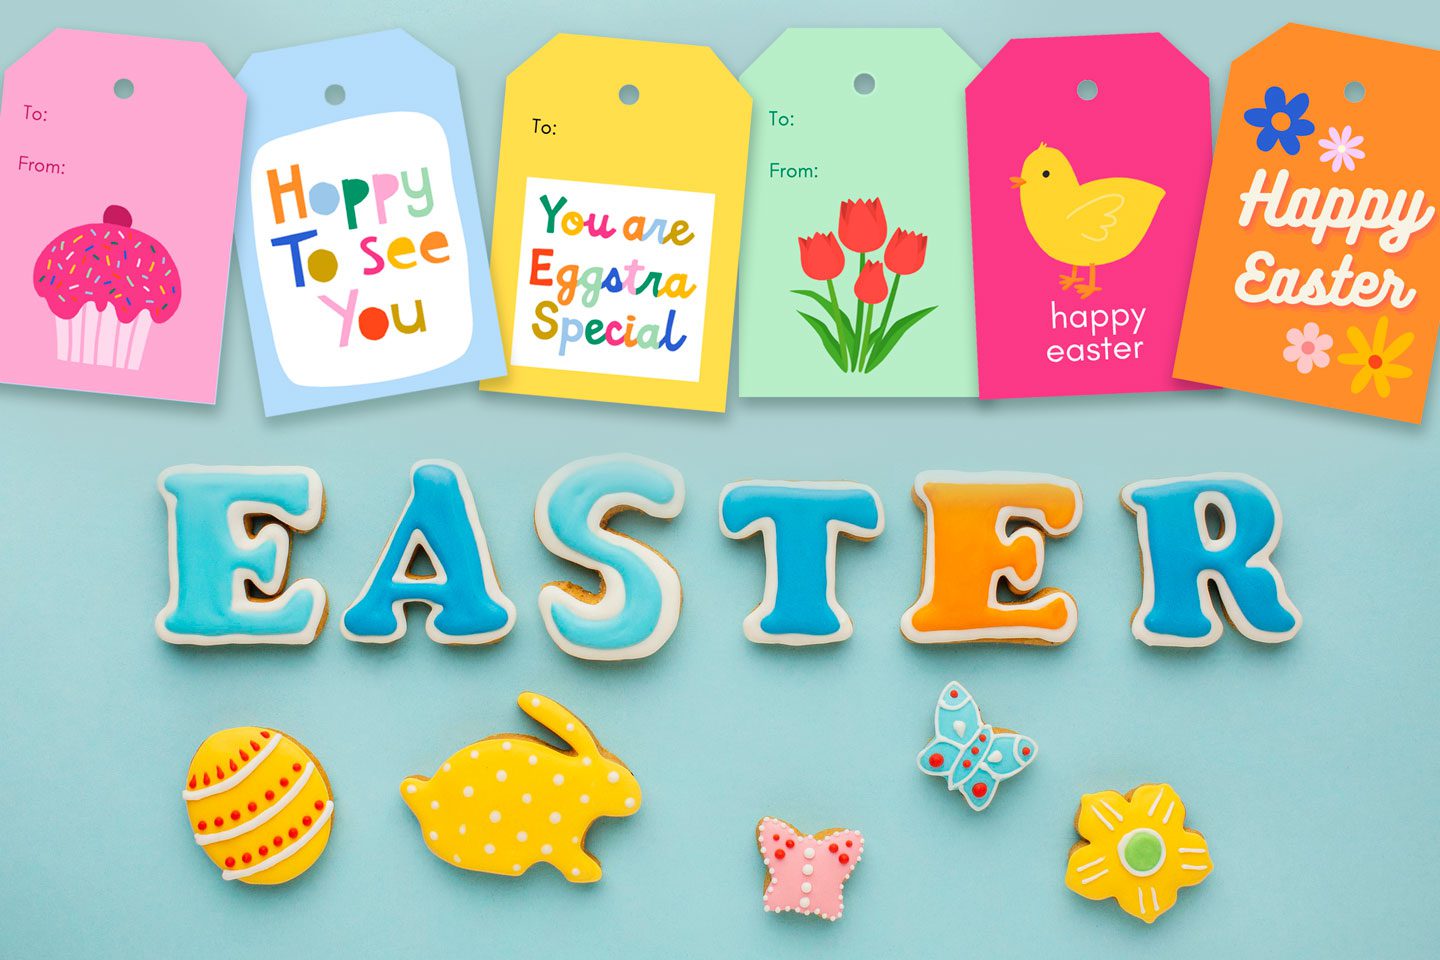 easter spelled out with decorated cookies and free printable gift tags surrounding it